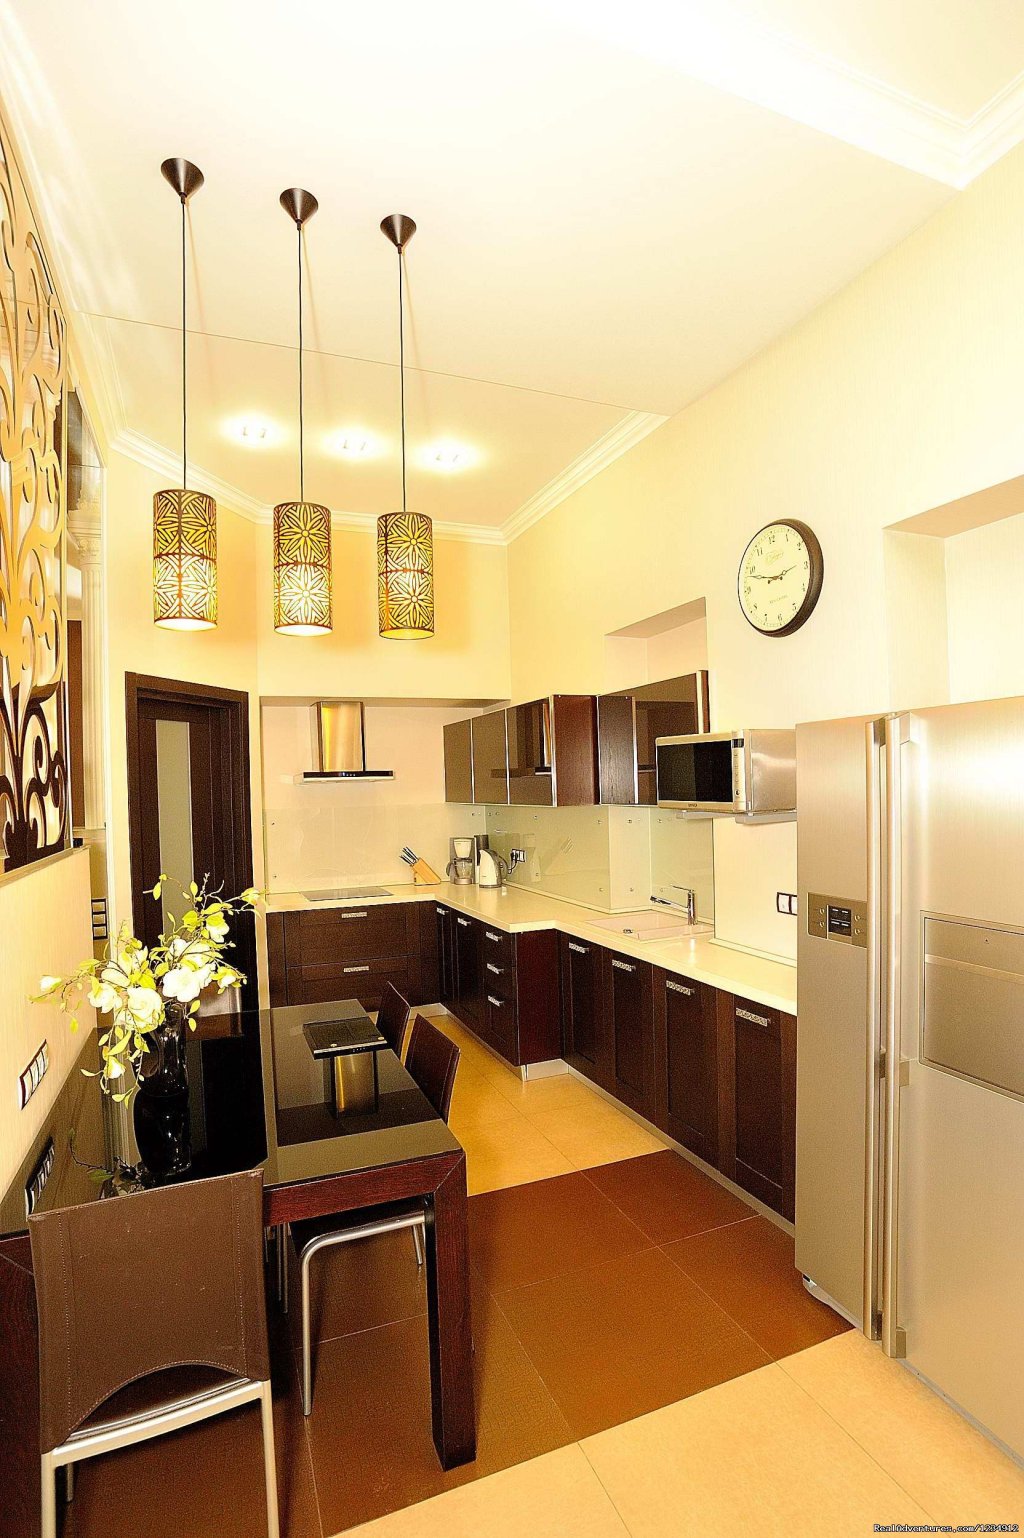 VIP 3room/2 bedroom apartment in the heart of Kiev | Image #5/24 | 